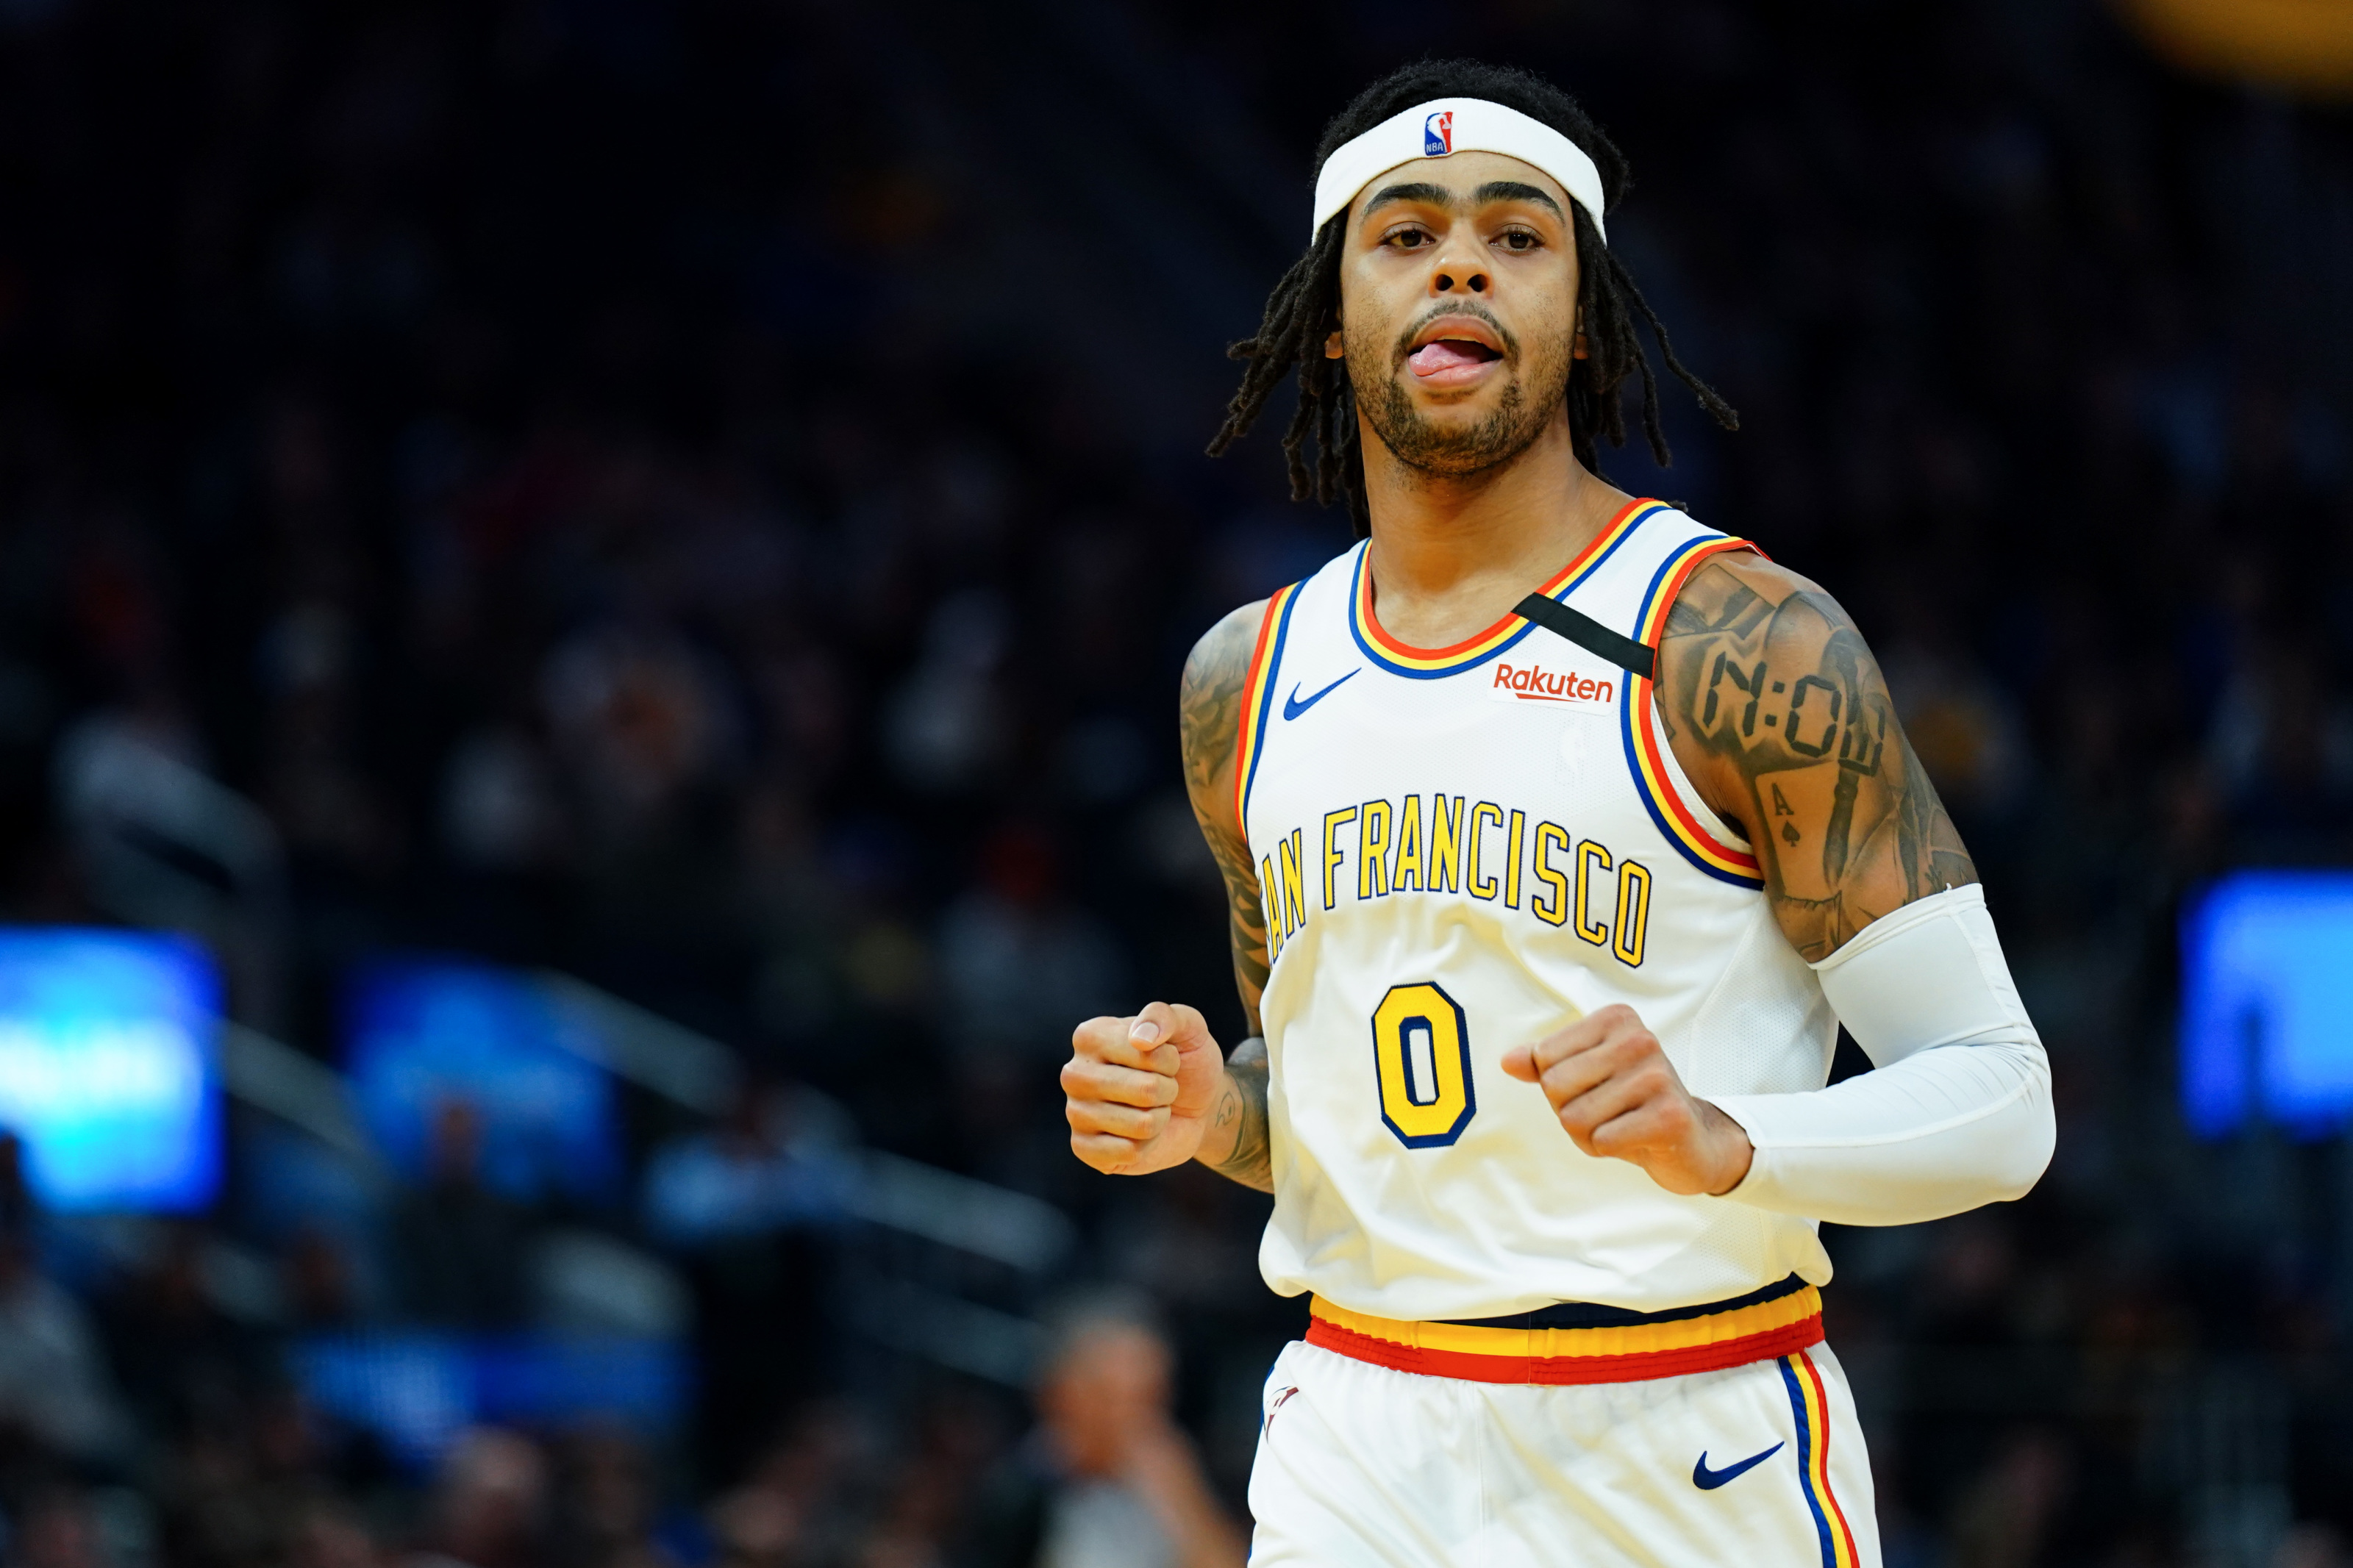 The Warriors shouldn't trade D'Angelo Russell PERIOD